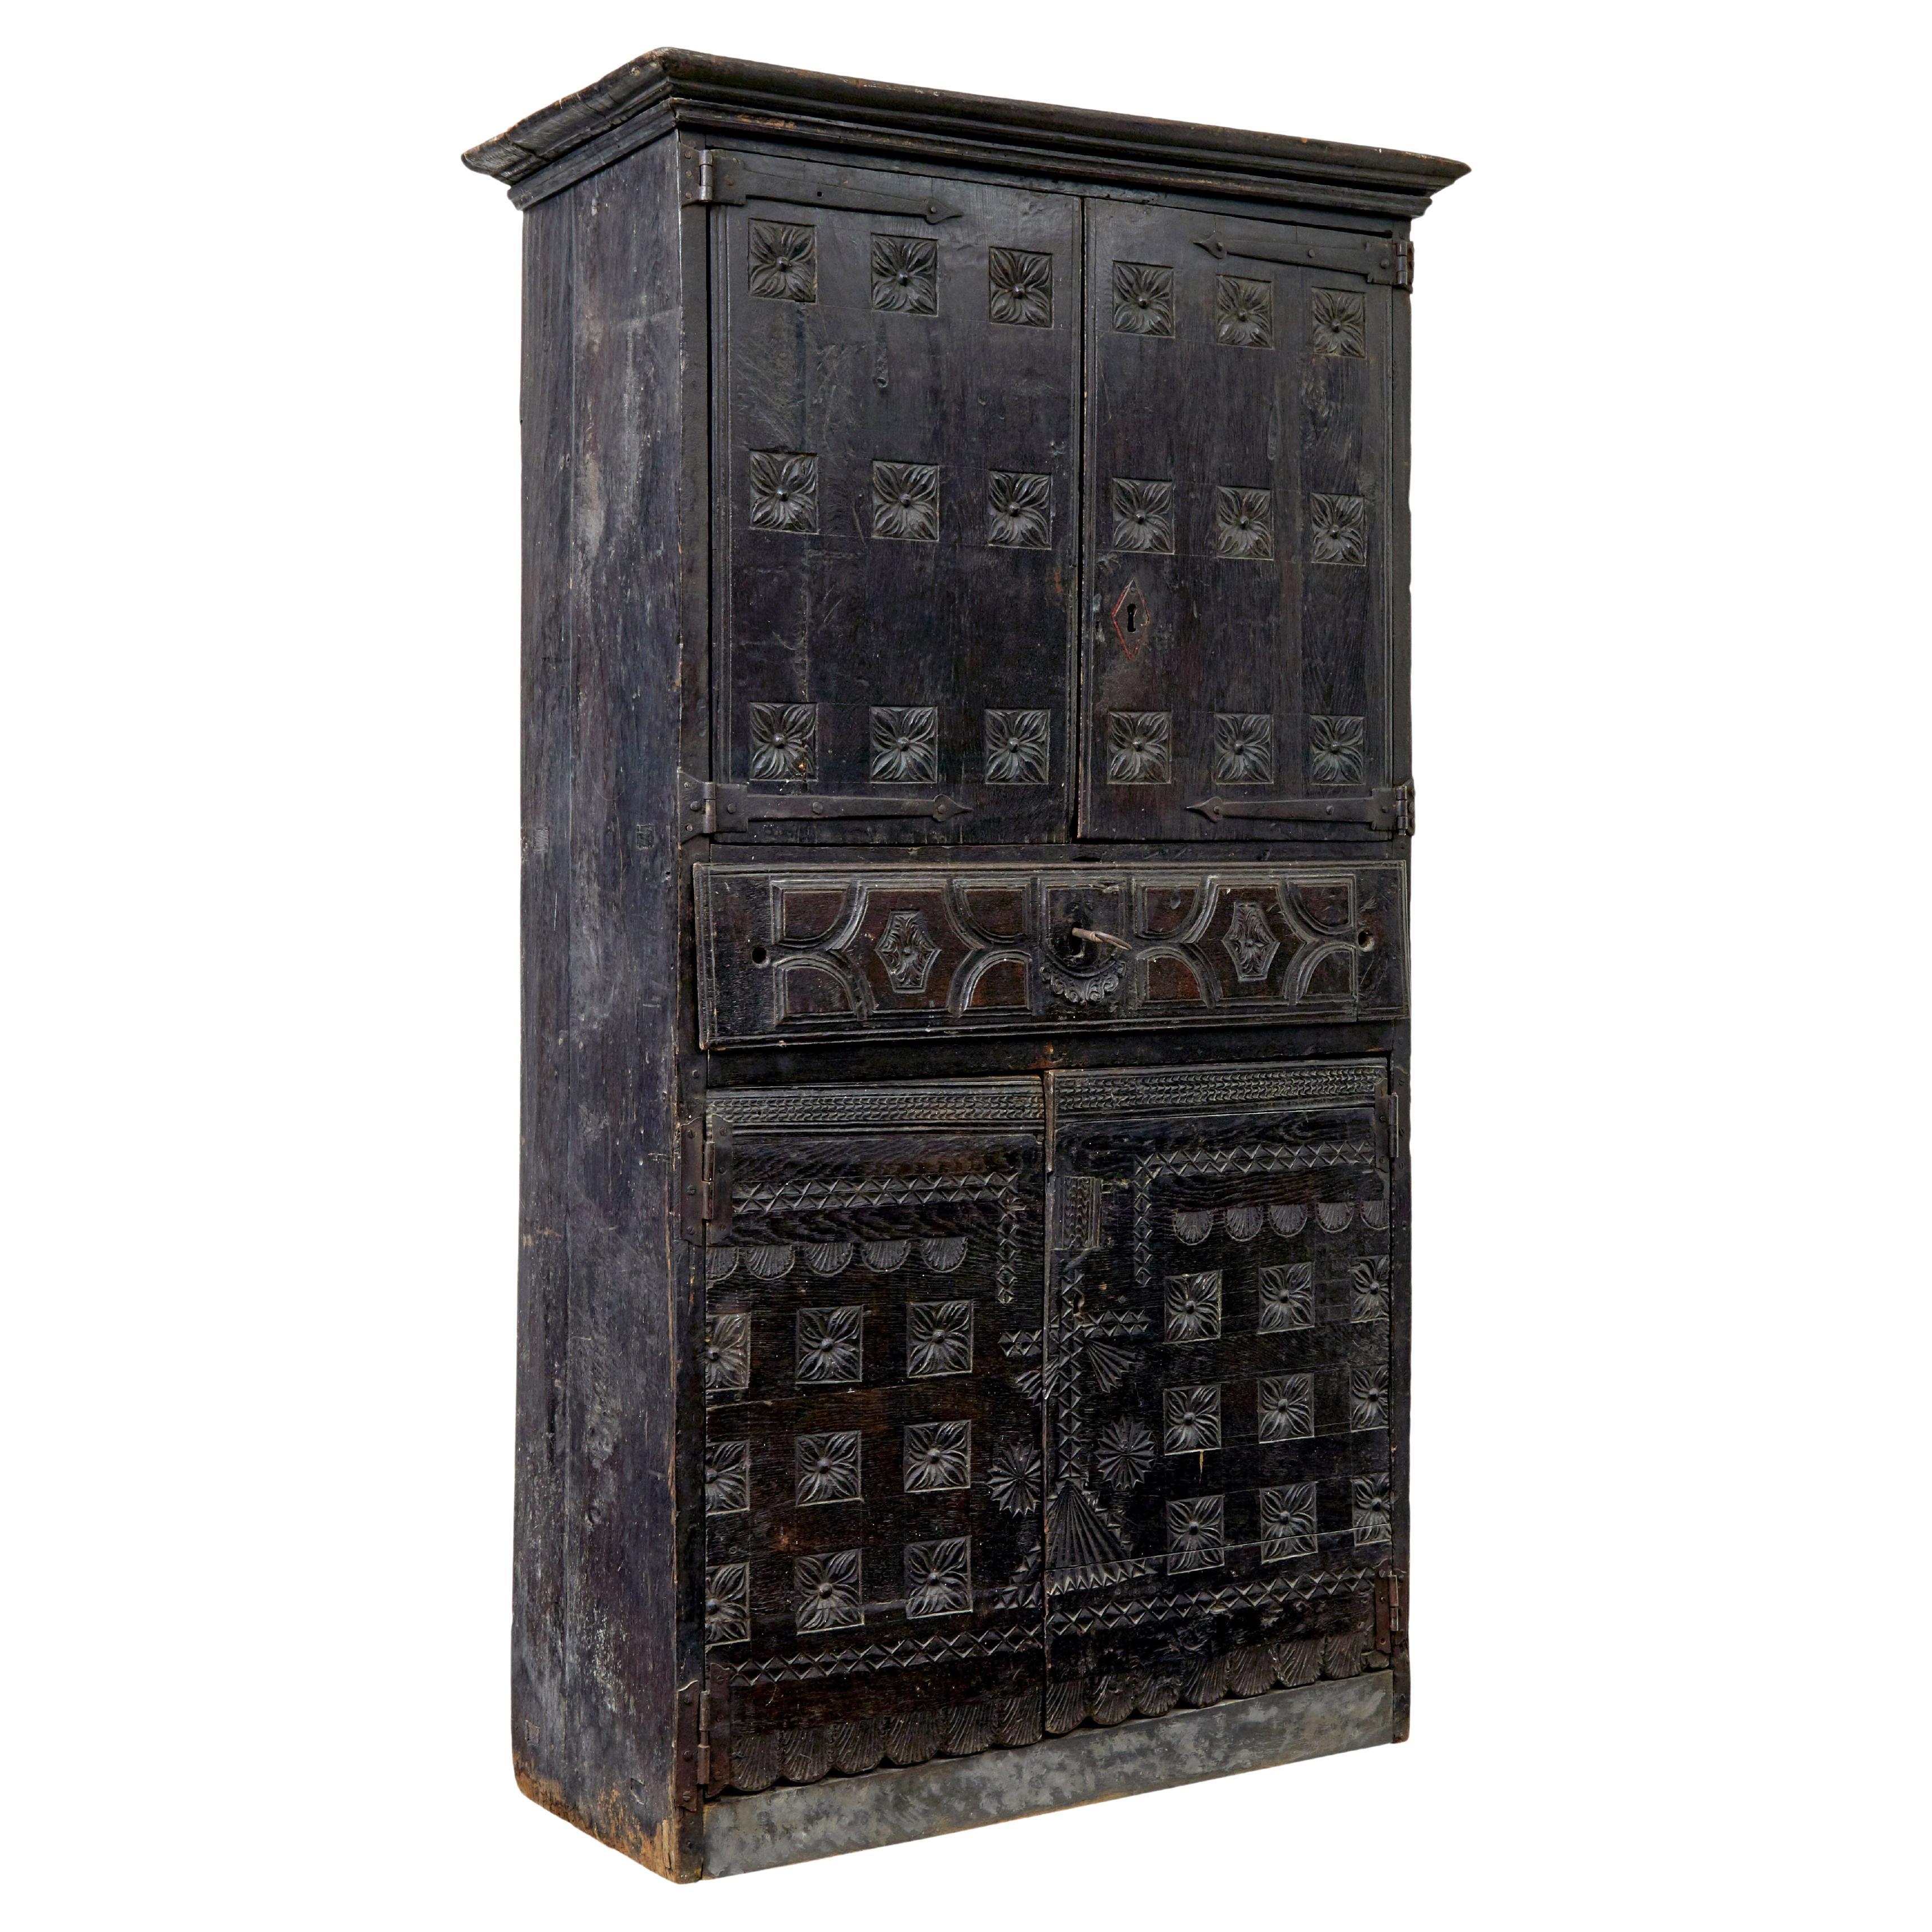 Early 19th century Pyrenean folk art oak and chestnut carved cupboard For Sale